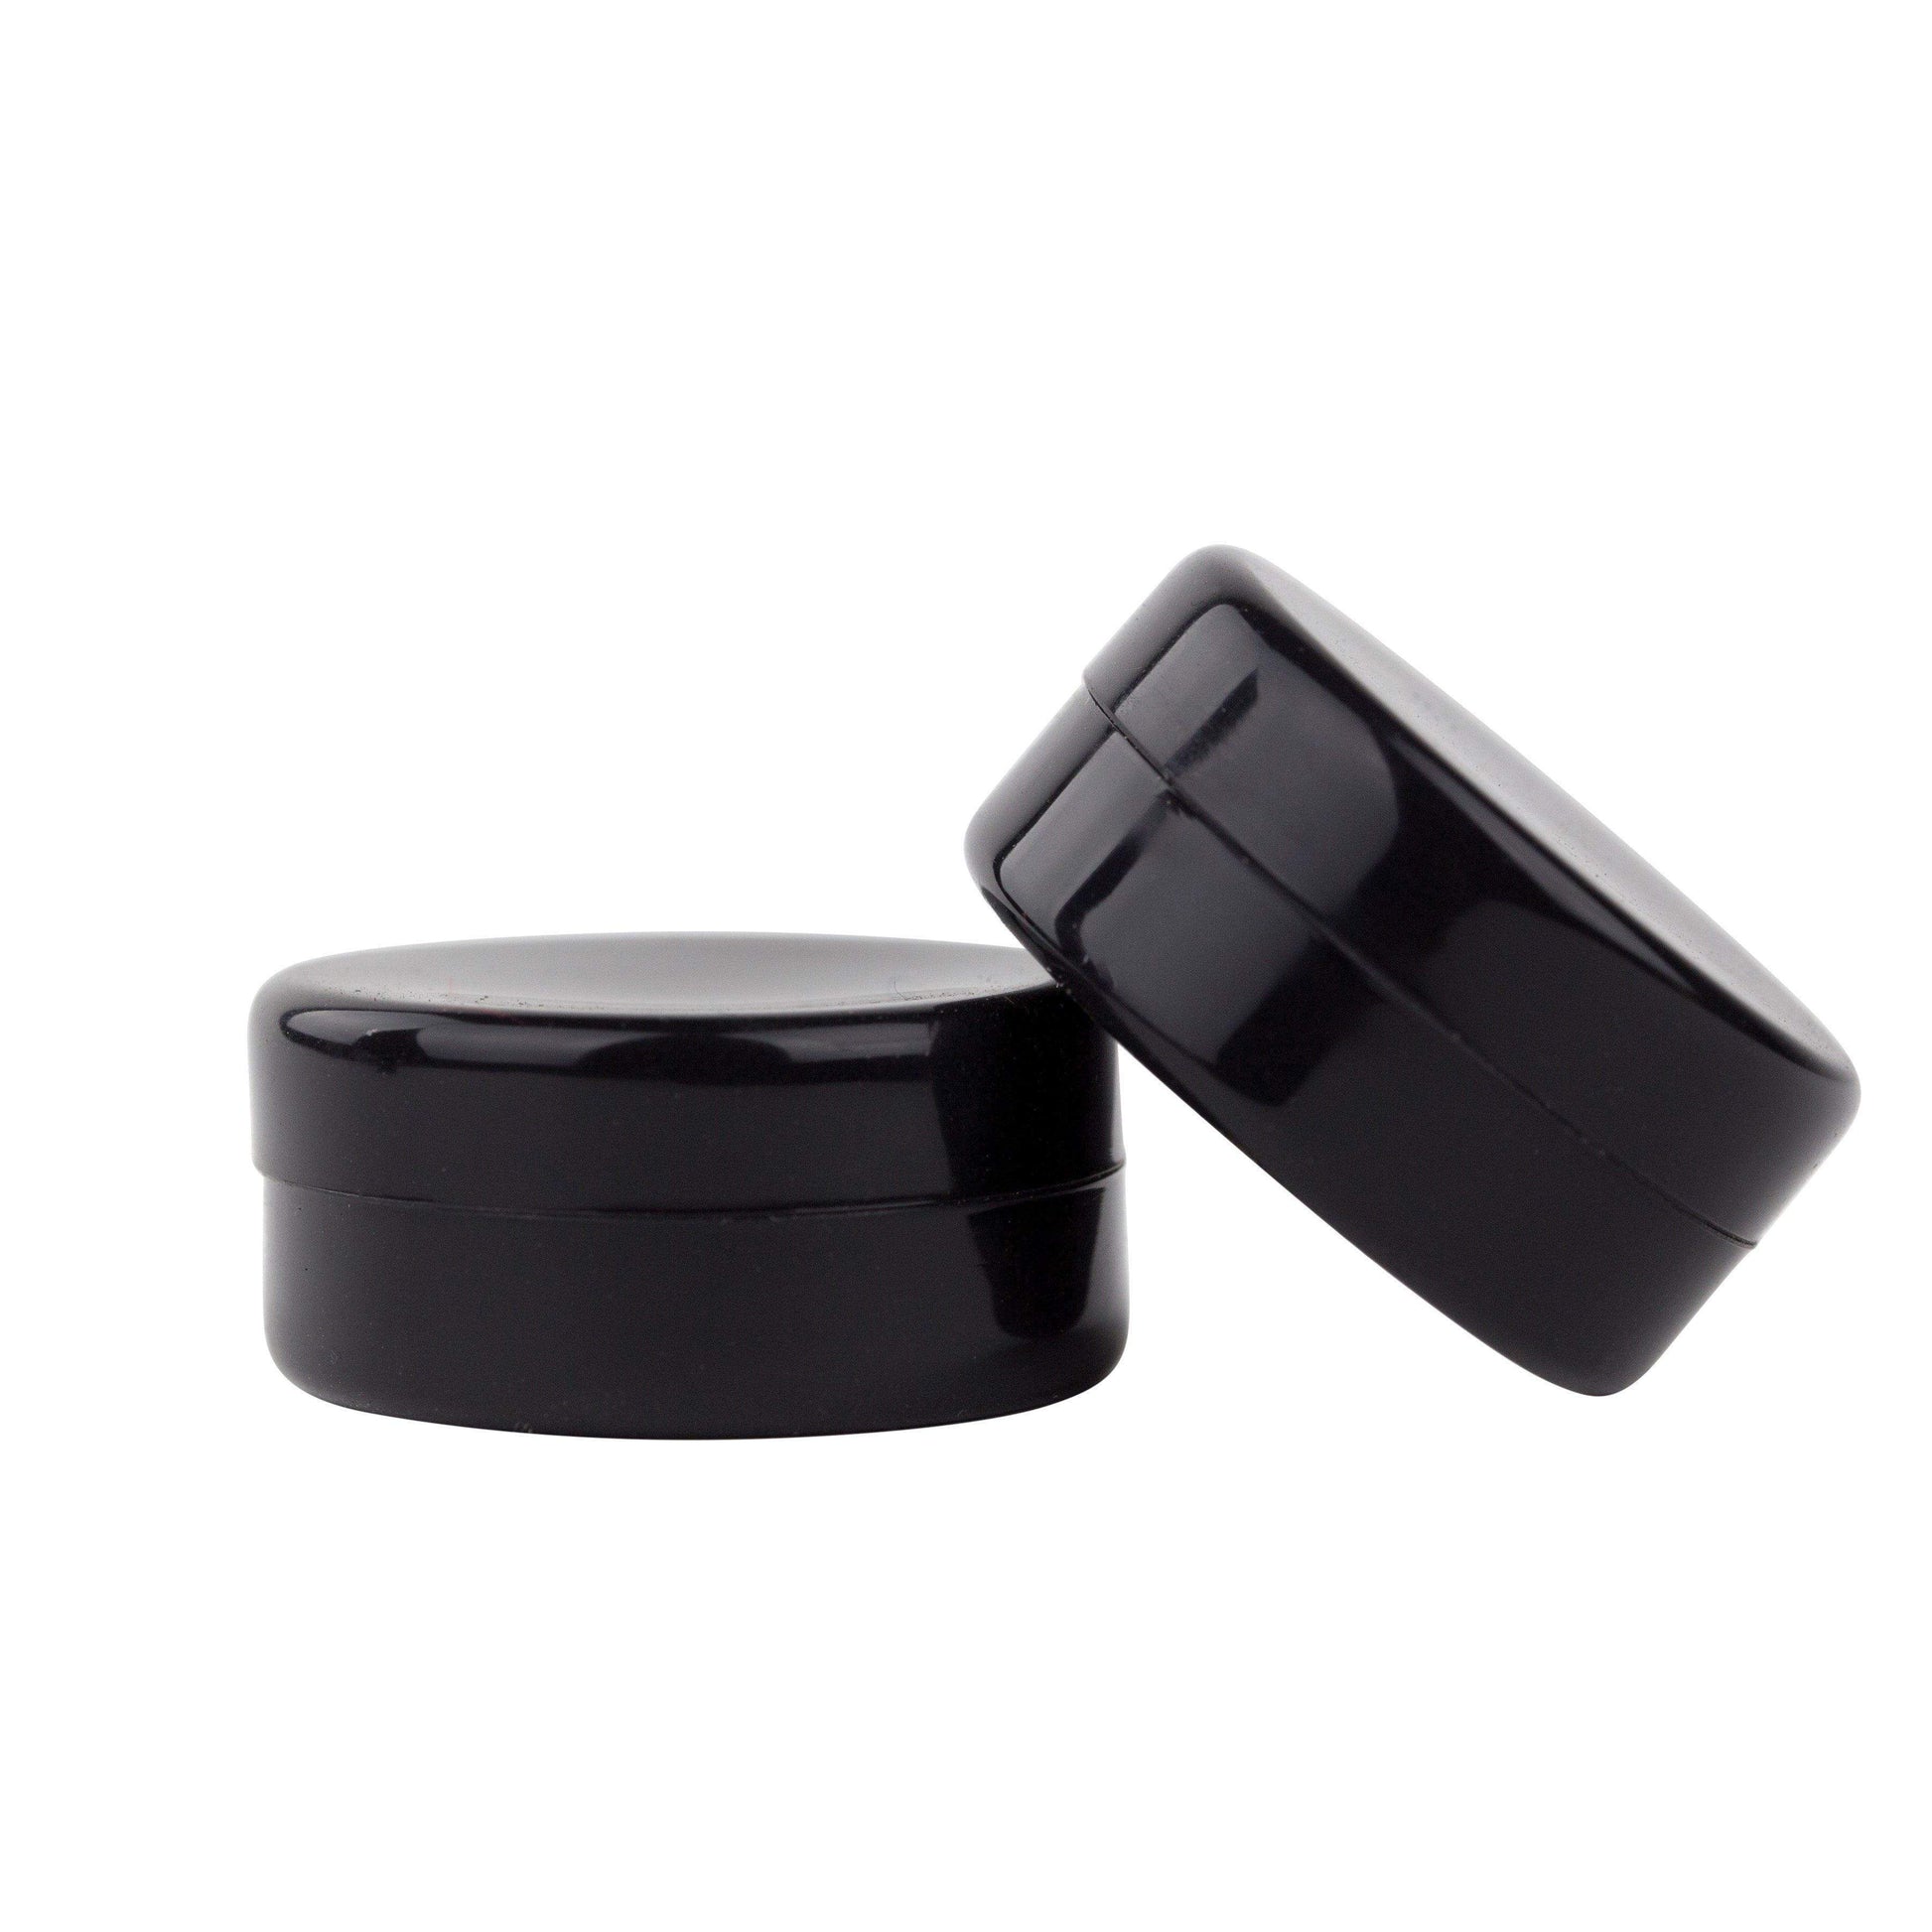 2-piece pocket-friendly round wax silicone container storage smoking accessory with classic bold design and smooth surface